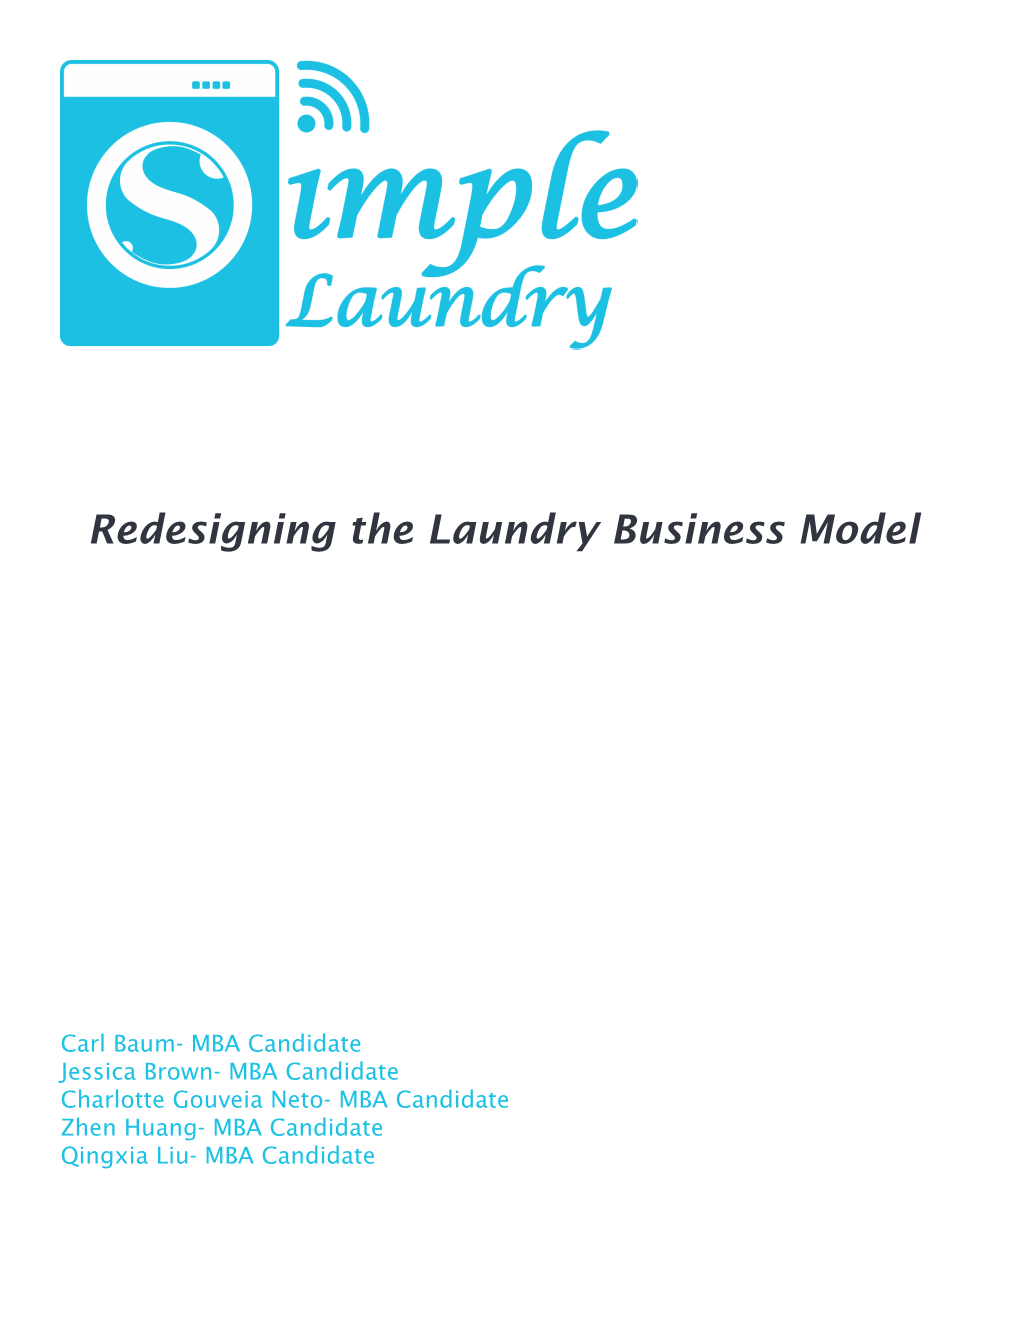 Redesigning the Laundry Business Model